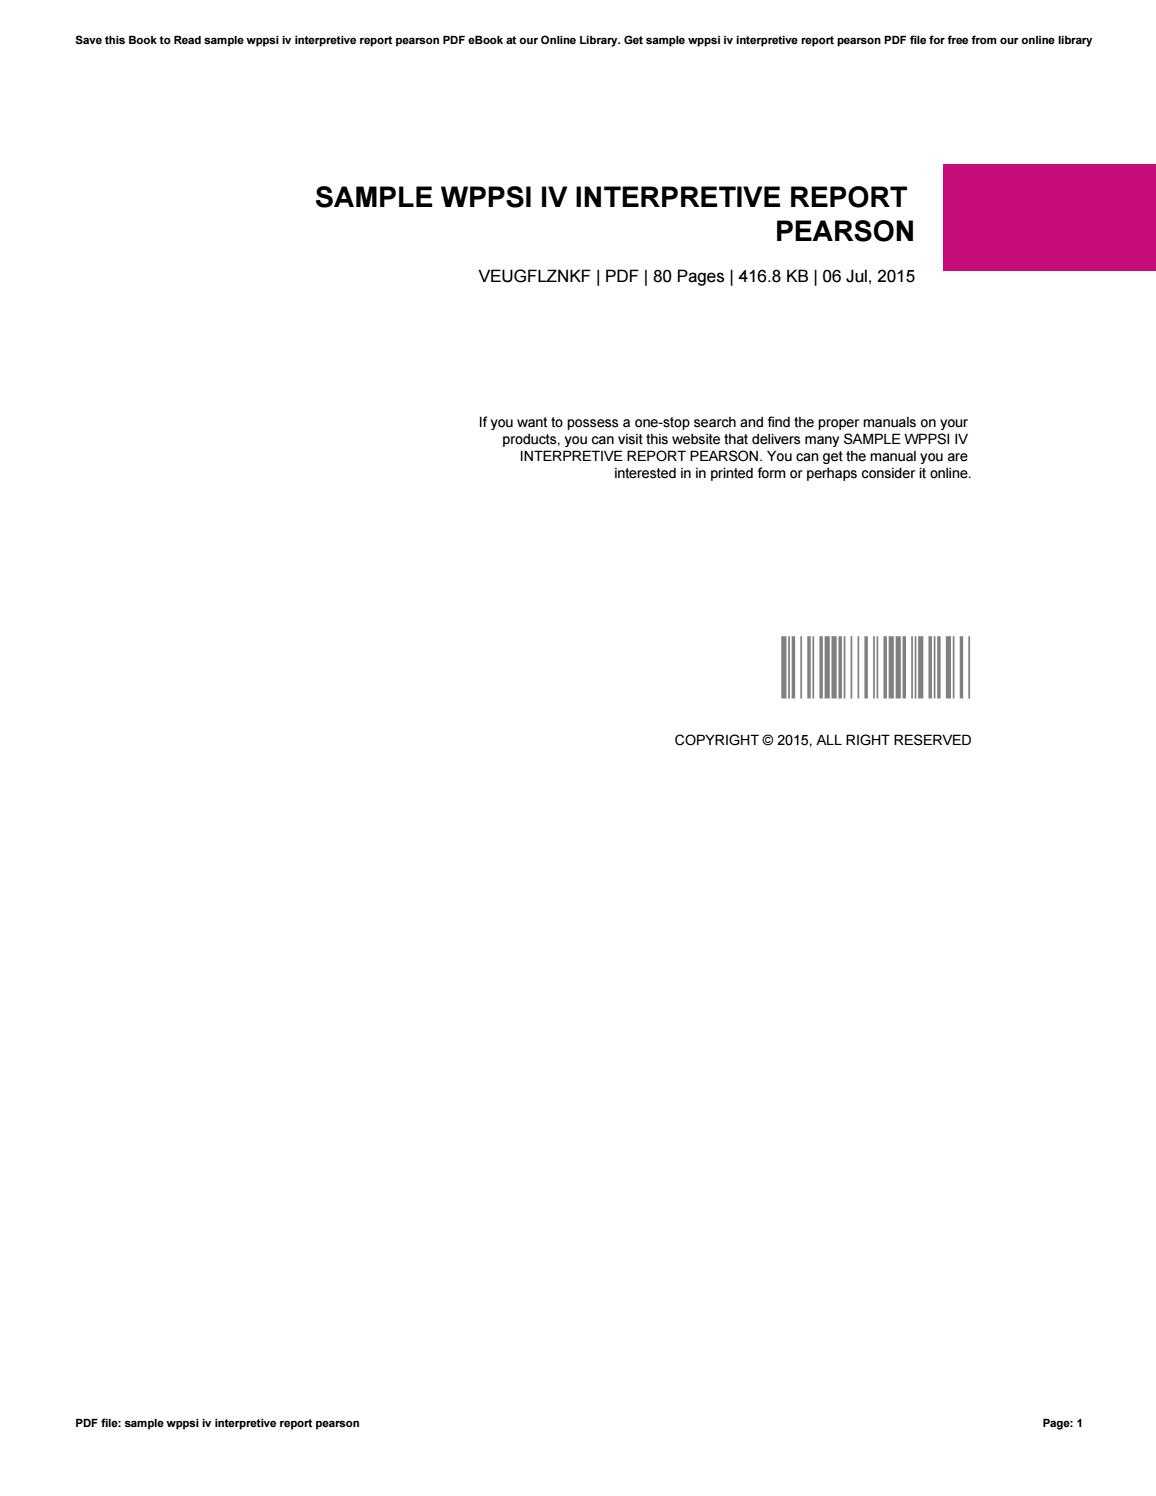 Sample Wppsi Iv Interpretive Report Pearson Throughout Wppsi Iv Report Template